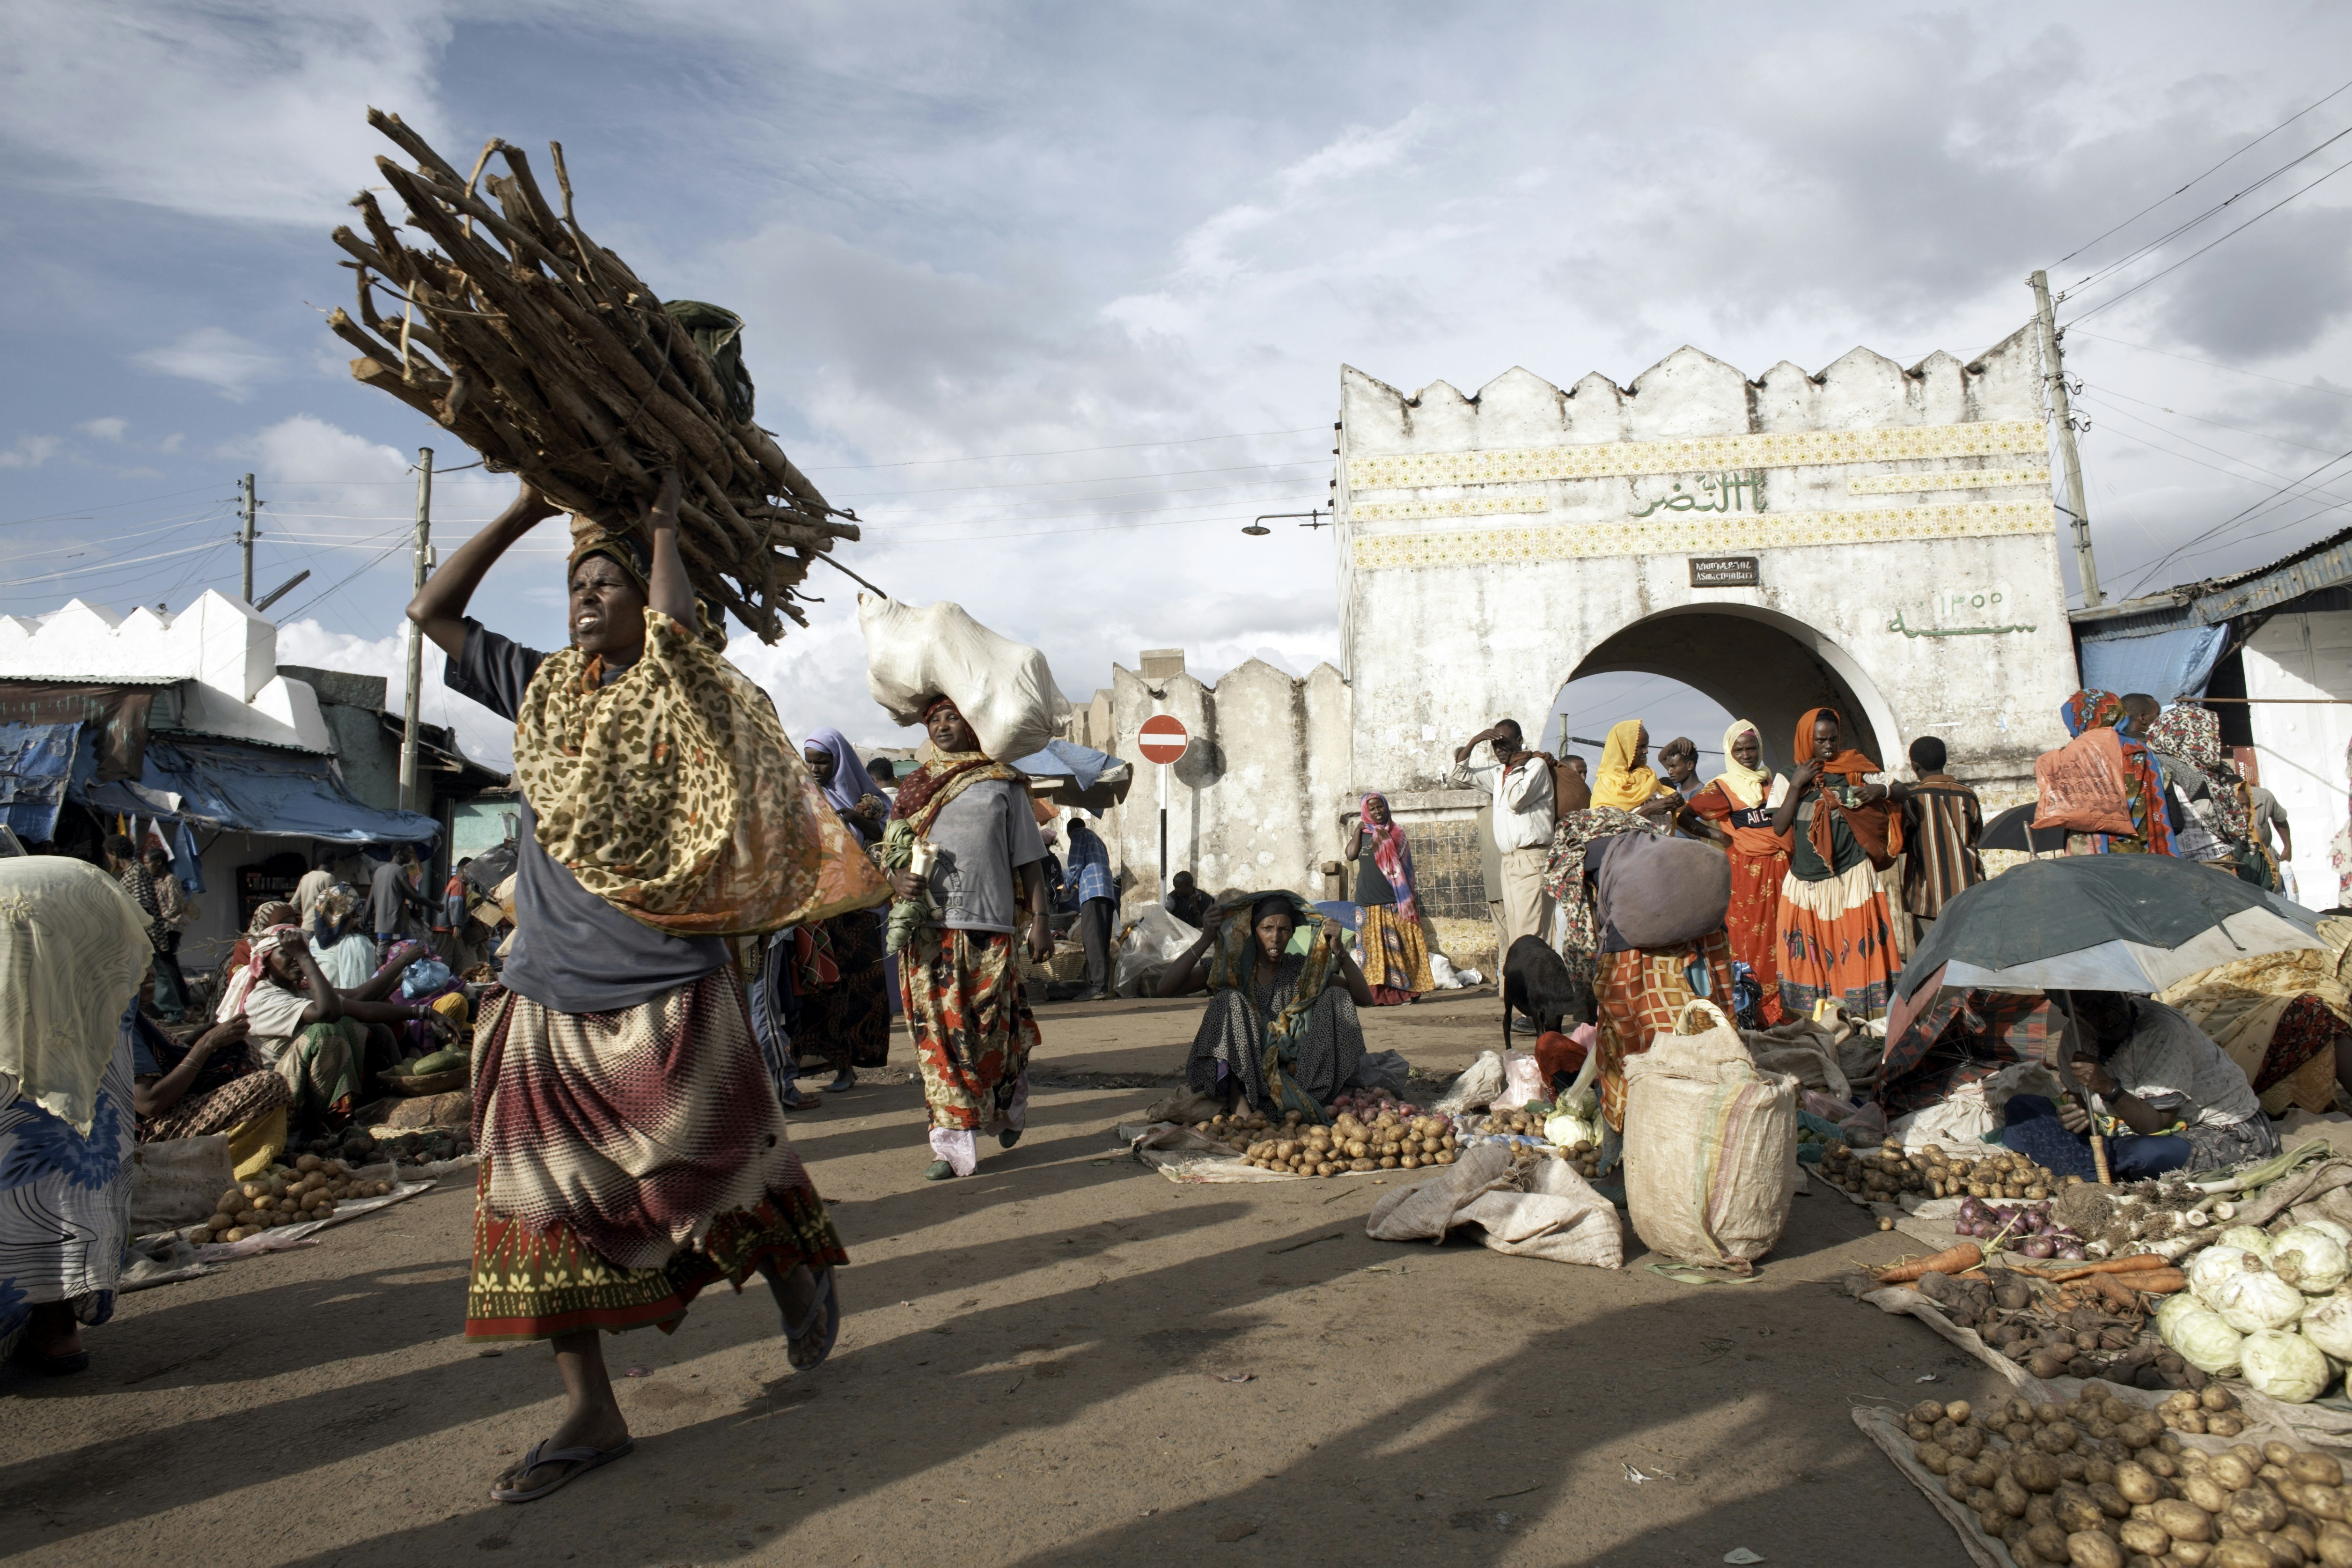 A busy market scene close to the large white stone gate leading into Harar Old Town. Many locals are carrying goods and produce.